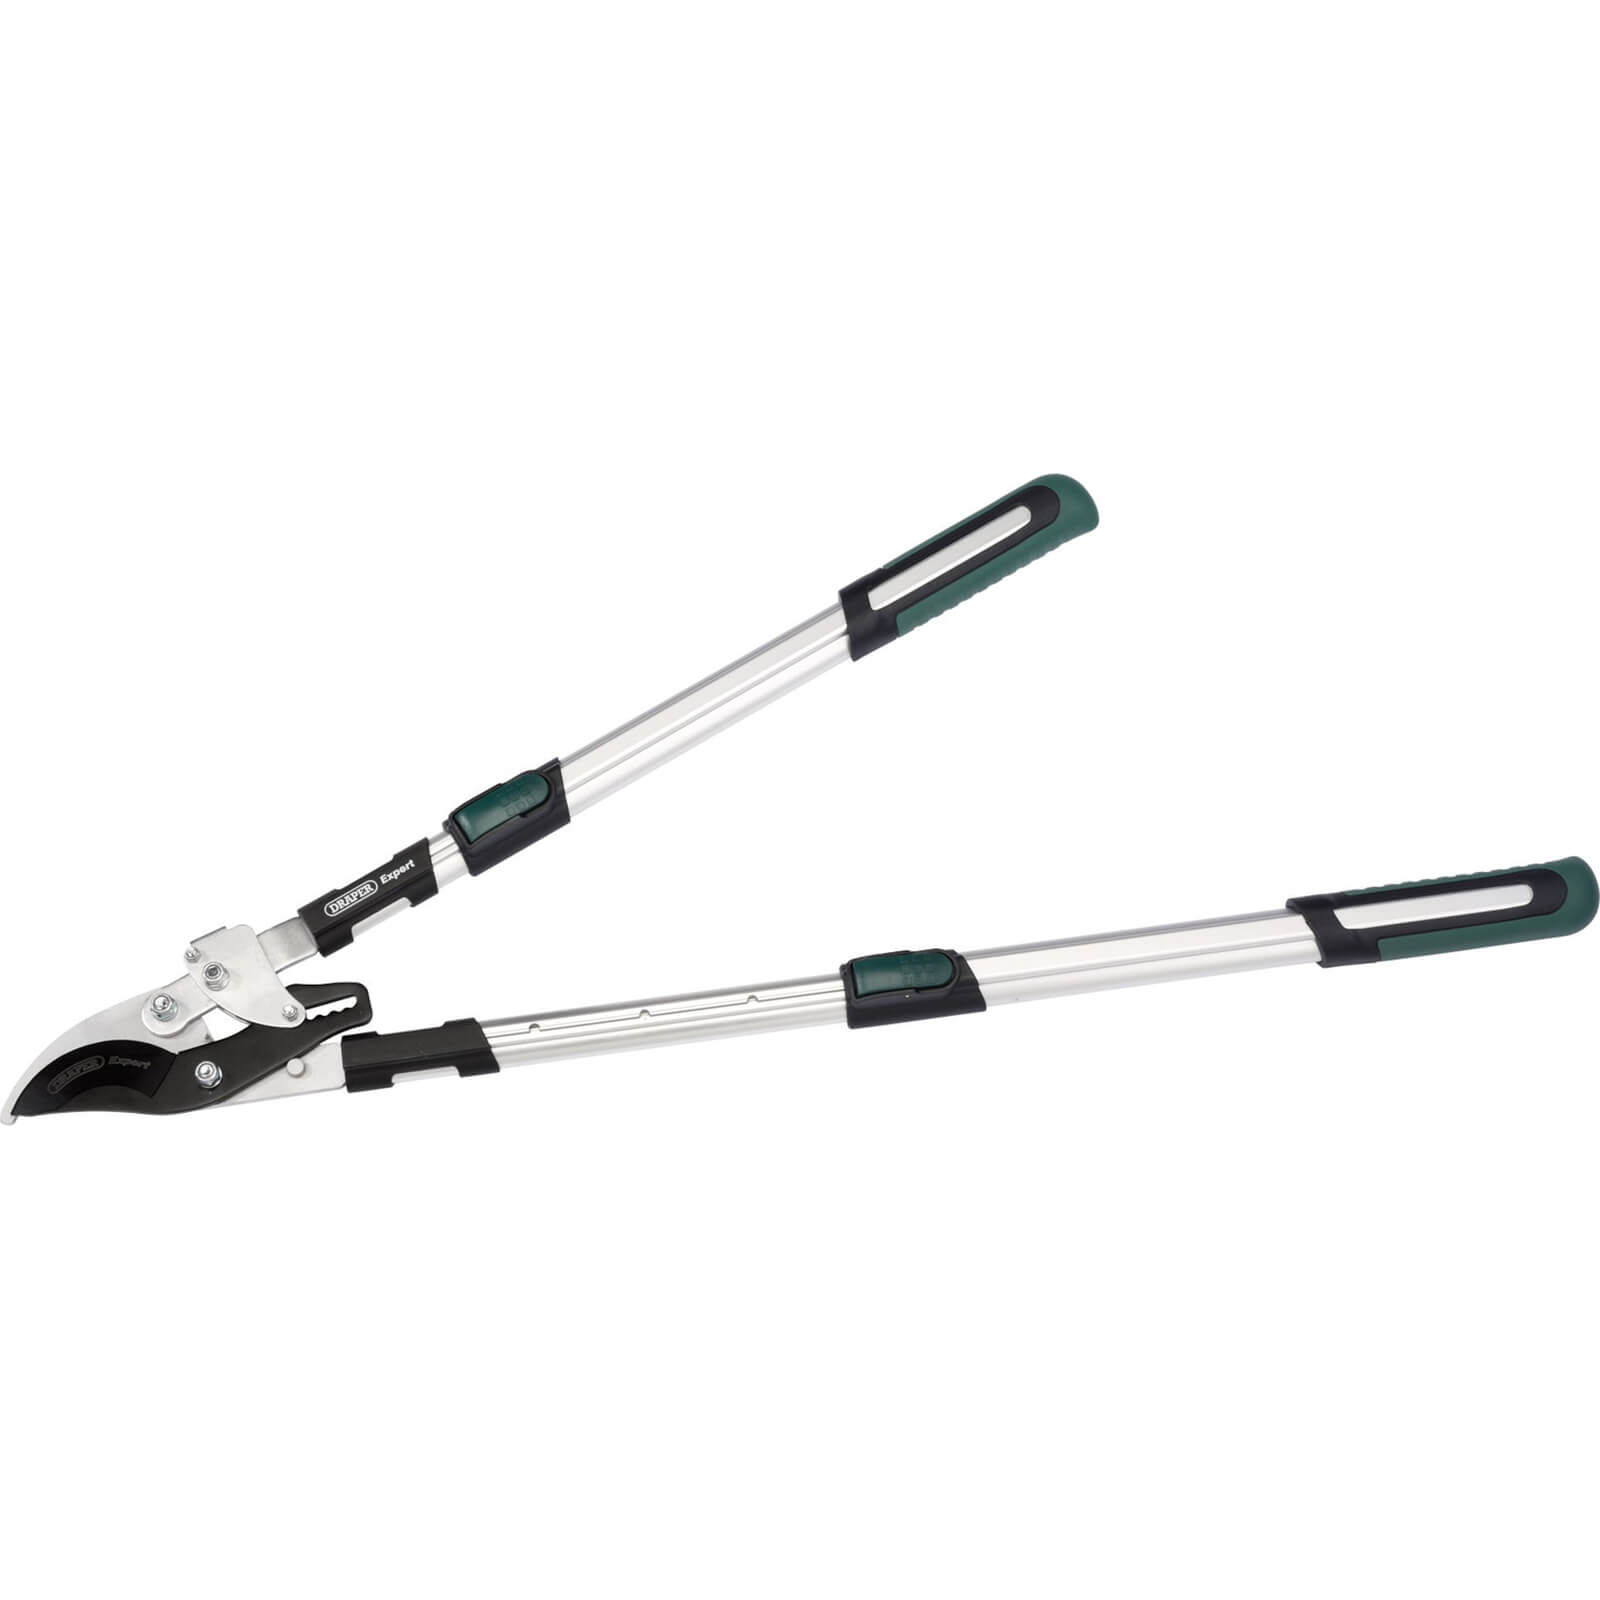 Image of Draper Expert Telescopic Ratchet Bypass Loppers 695mm